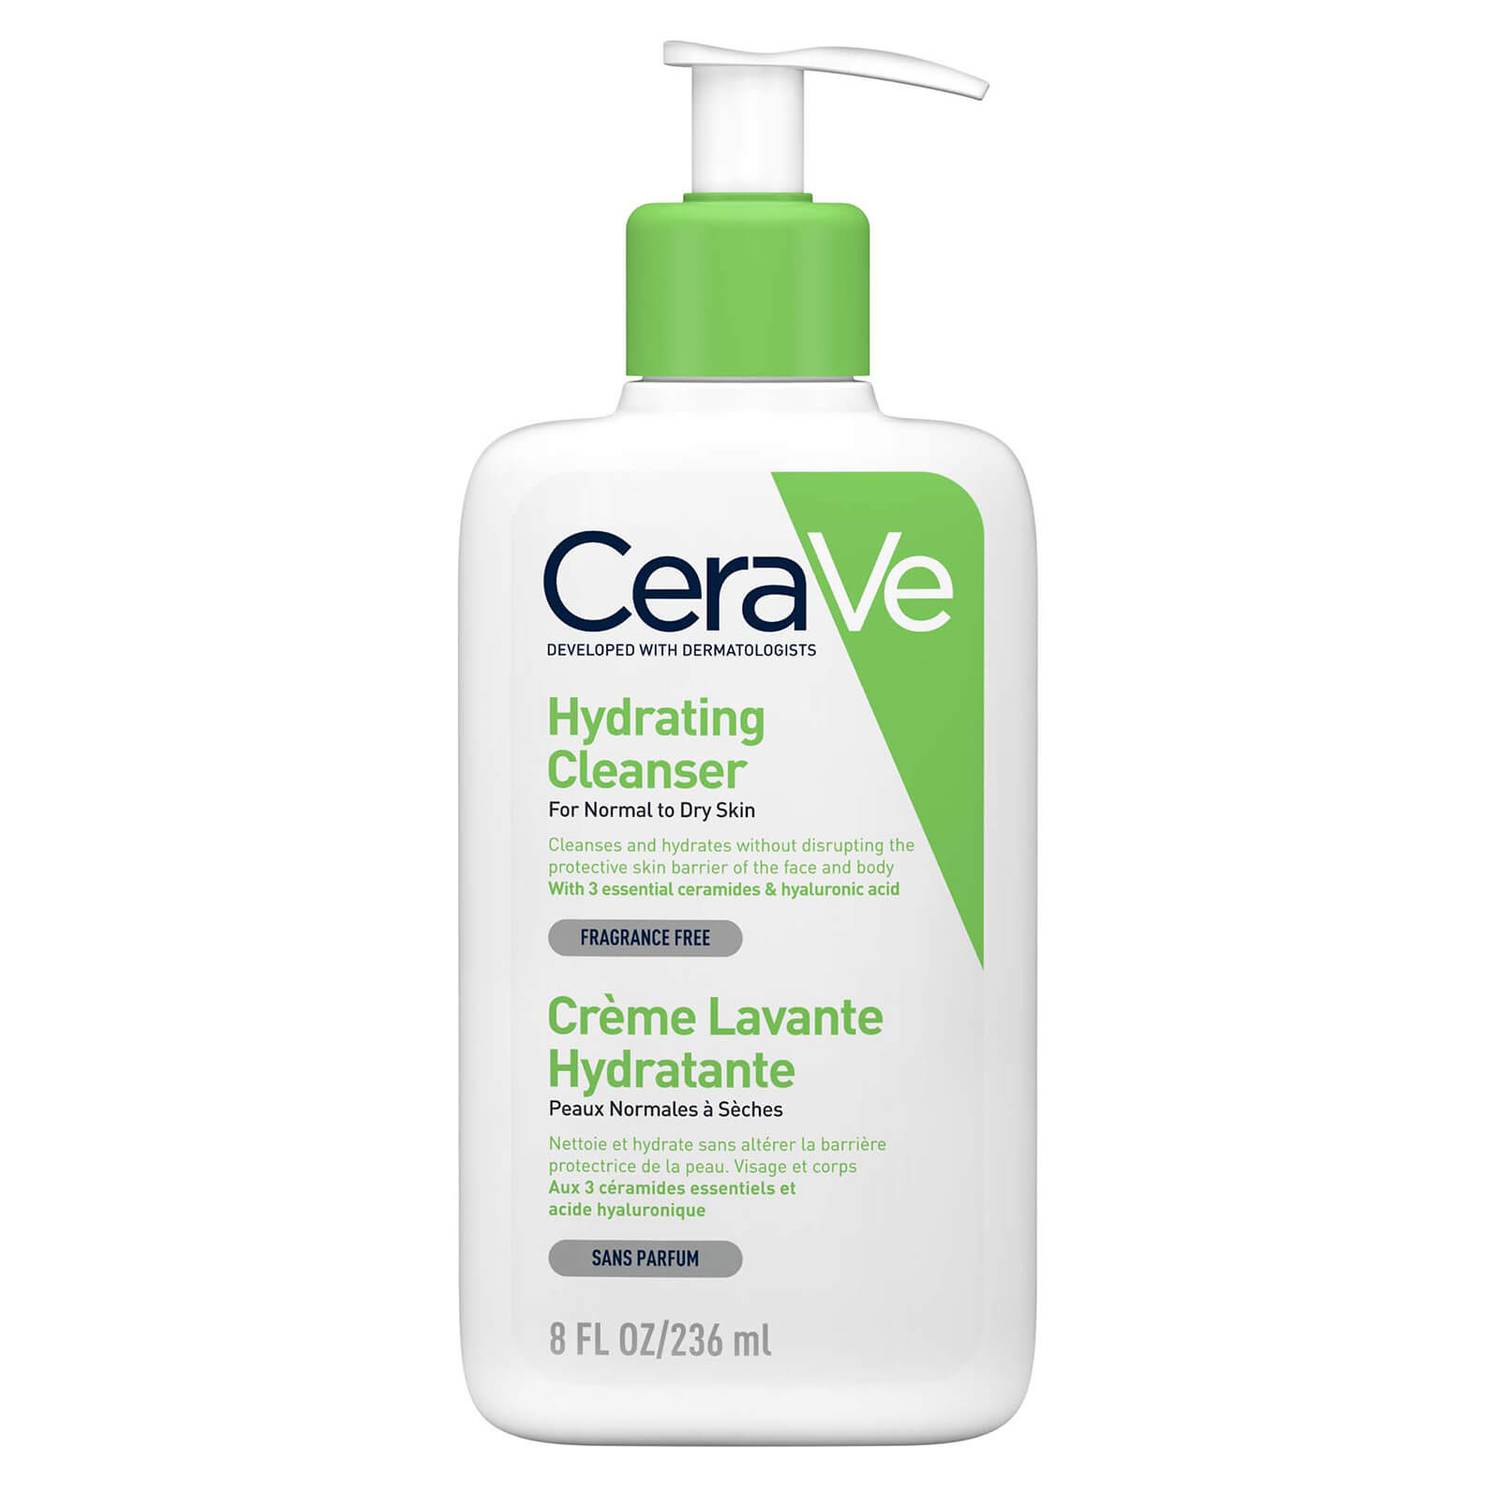 CeraVe Hydrating Cleanser with Hyaluronic Acid for Normal to Dry Skin 236ml (Country of Origin: France)